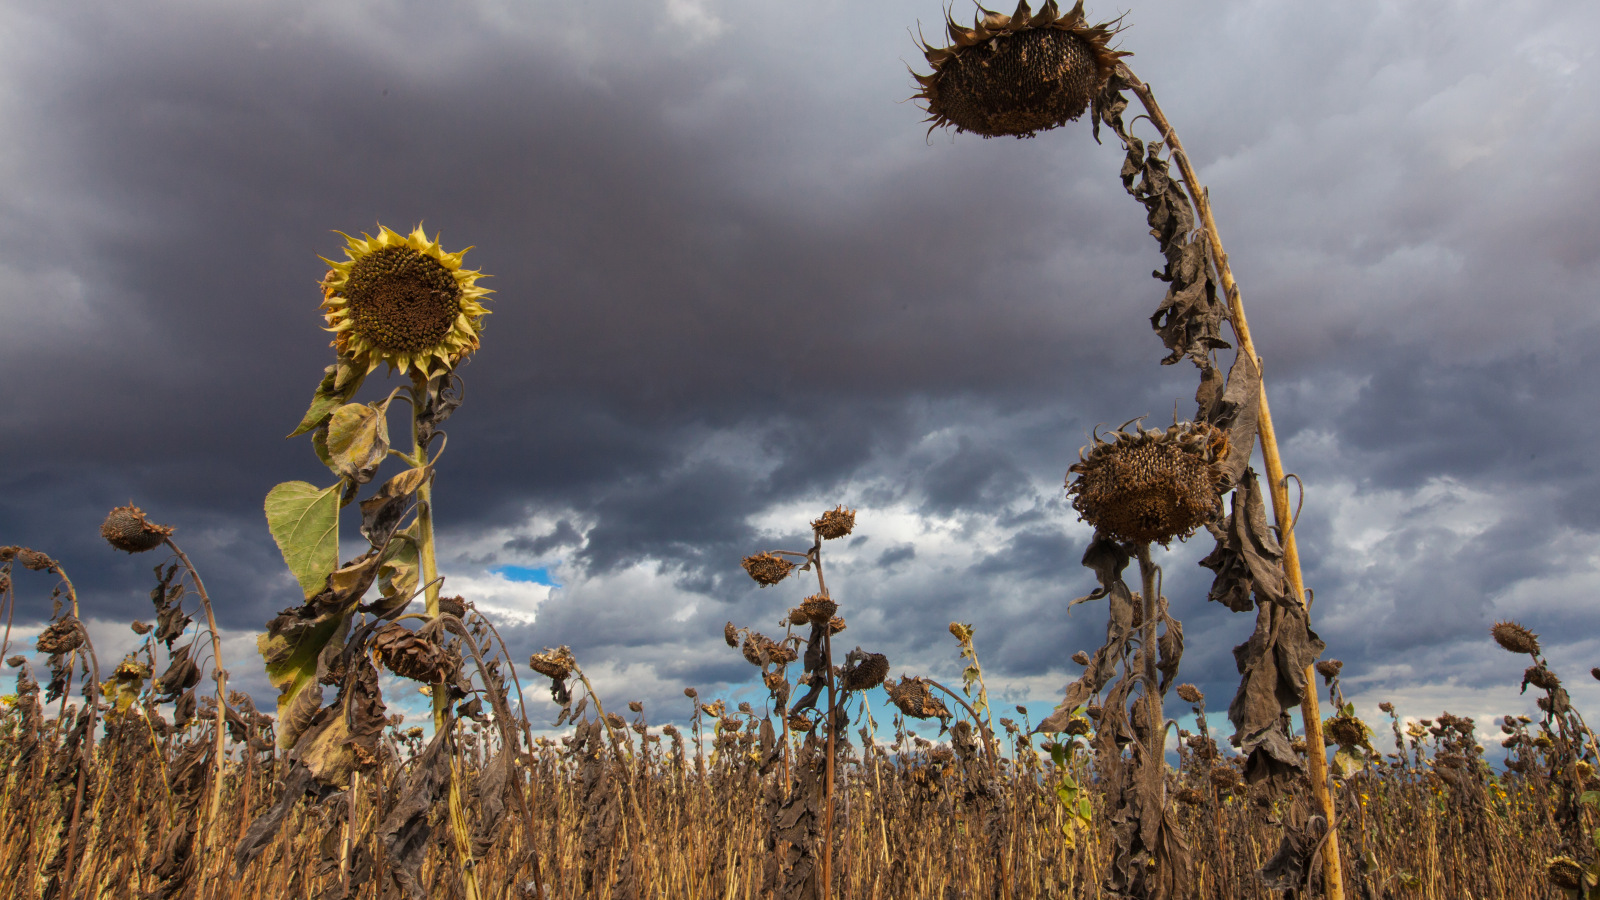 Photo of dry, wilted sunflowers with dark clouds in the background